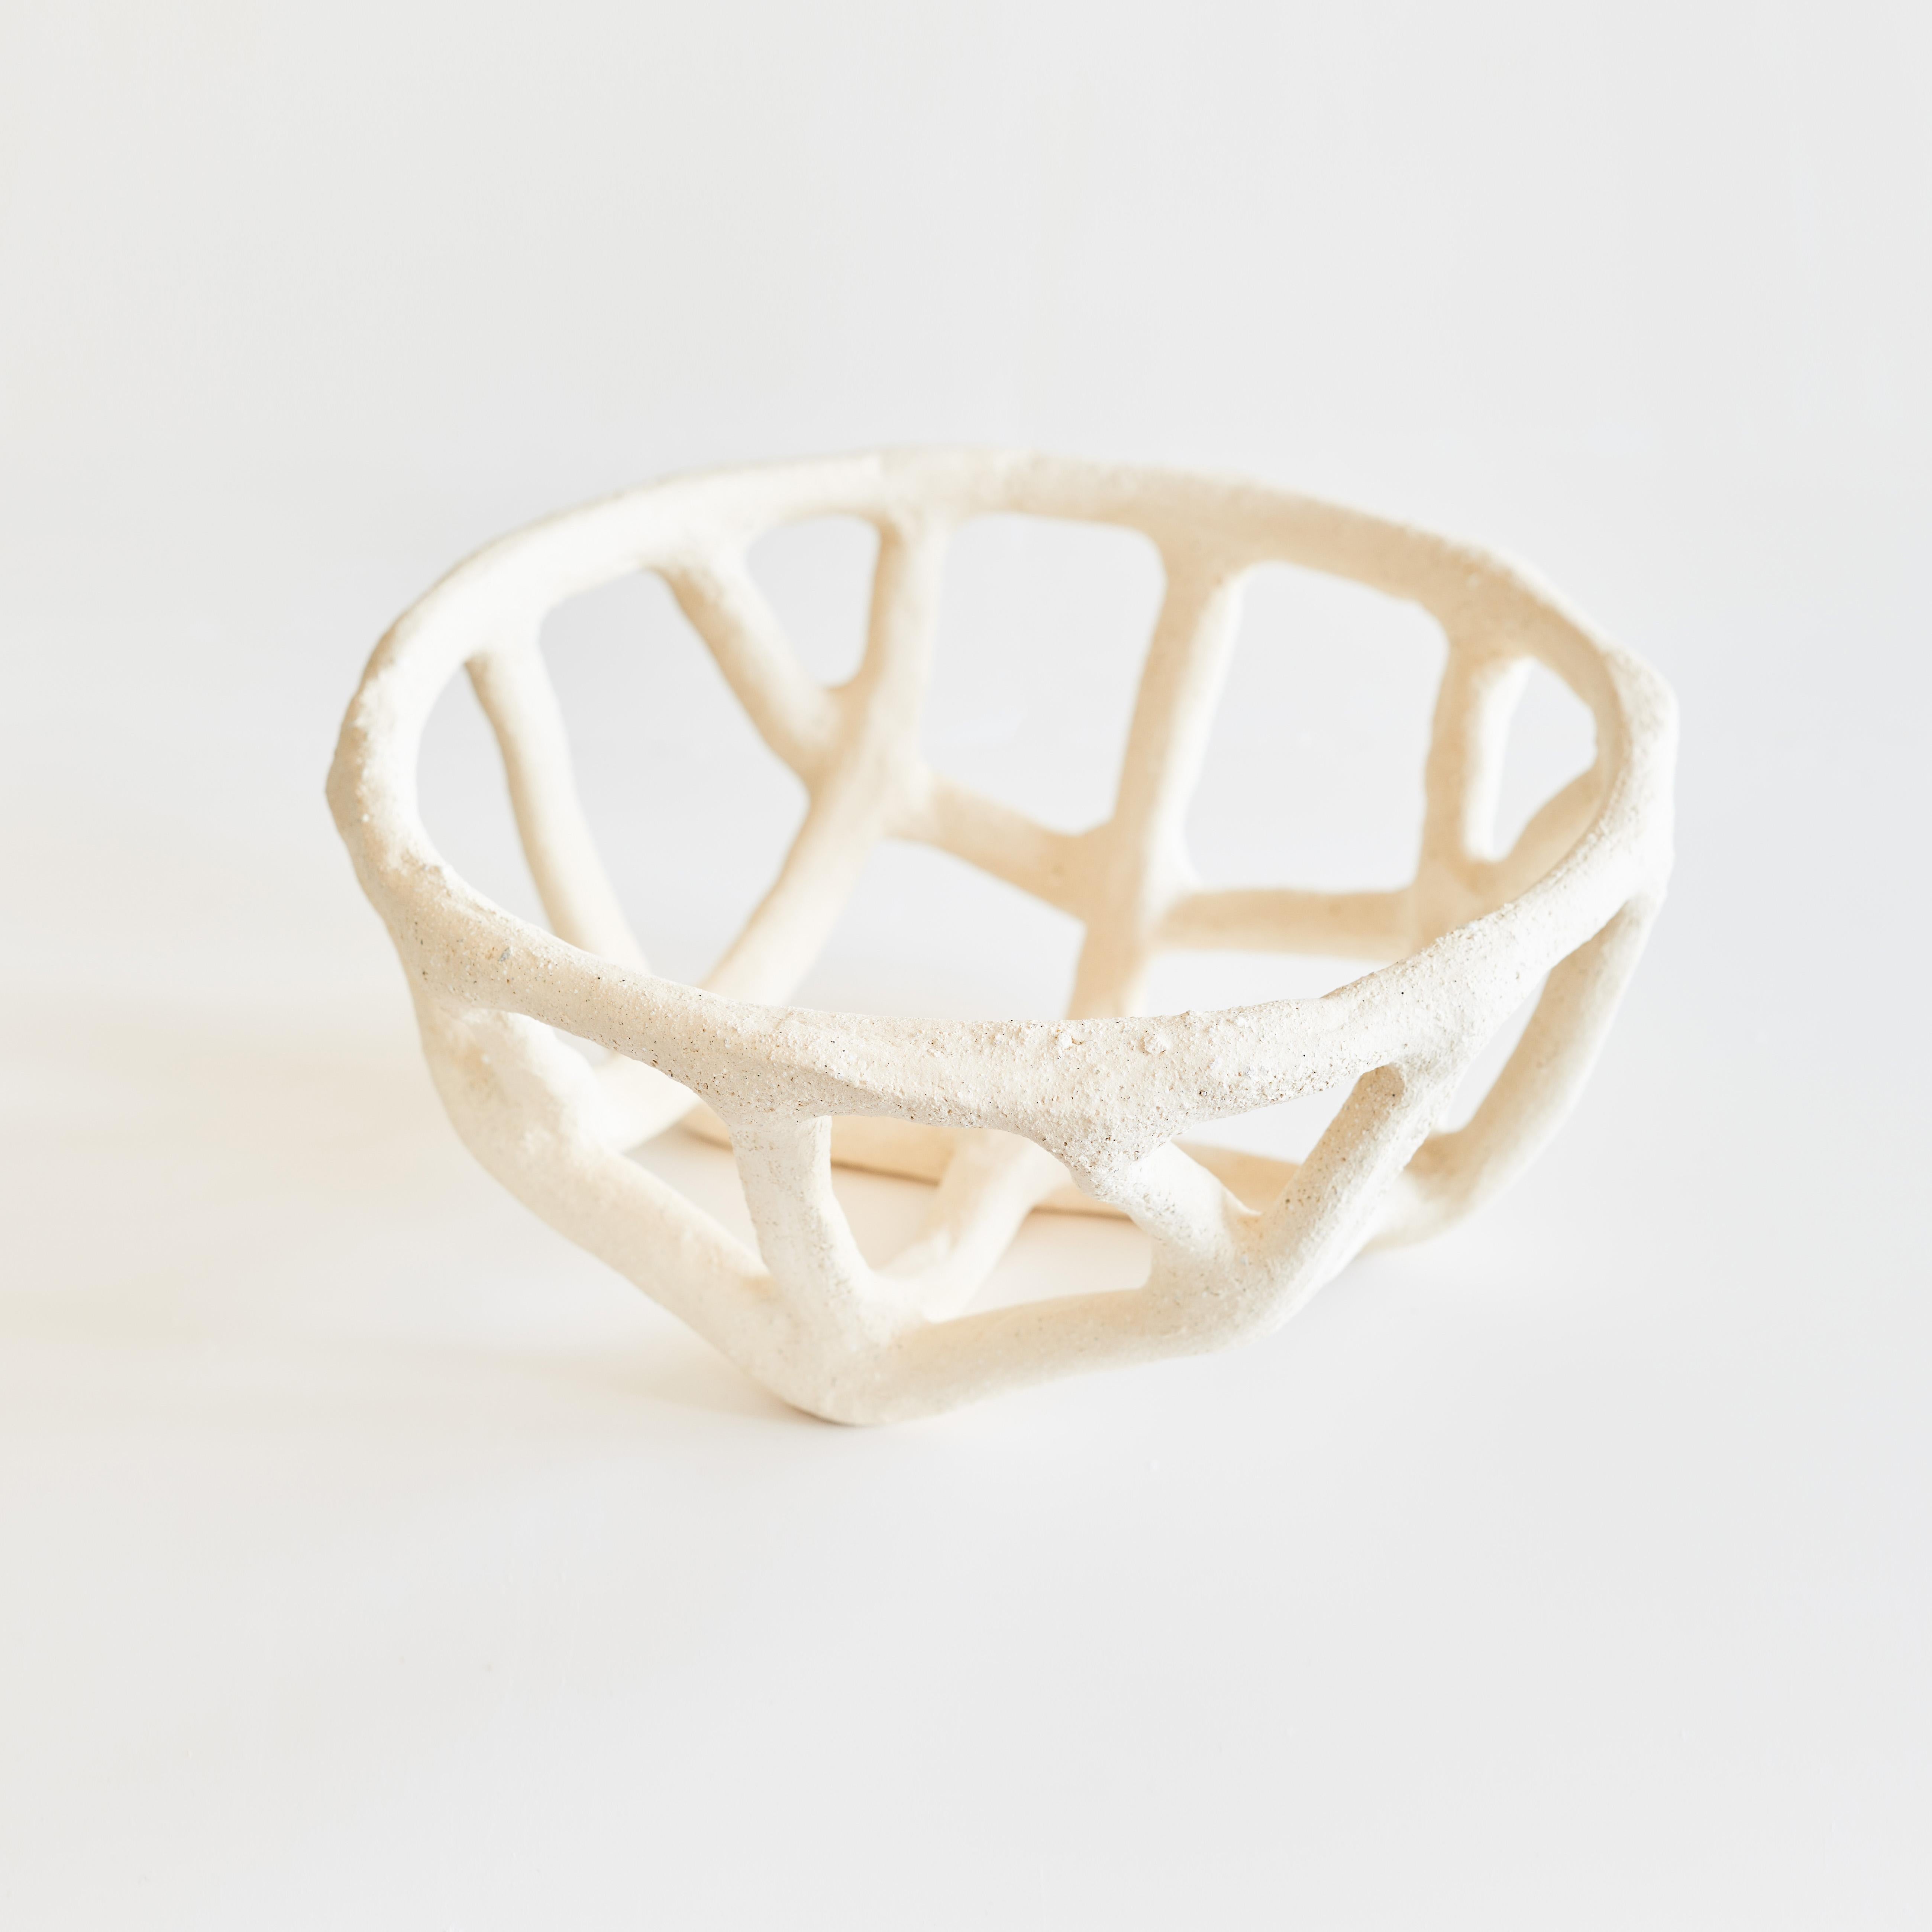 La Corbeille XXI Medium by Claire Pain 
Dimensions: D 33 x H 14 cm
Materials: Raw Stoneware

Fragility and delicacy arise from a raw material, in which strength and vigour intertwine to give shape to the singular work of Claire Pain.
Modeled